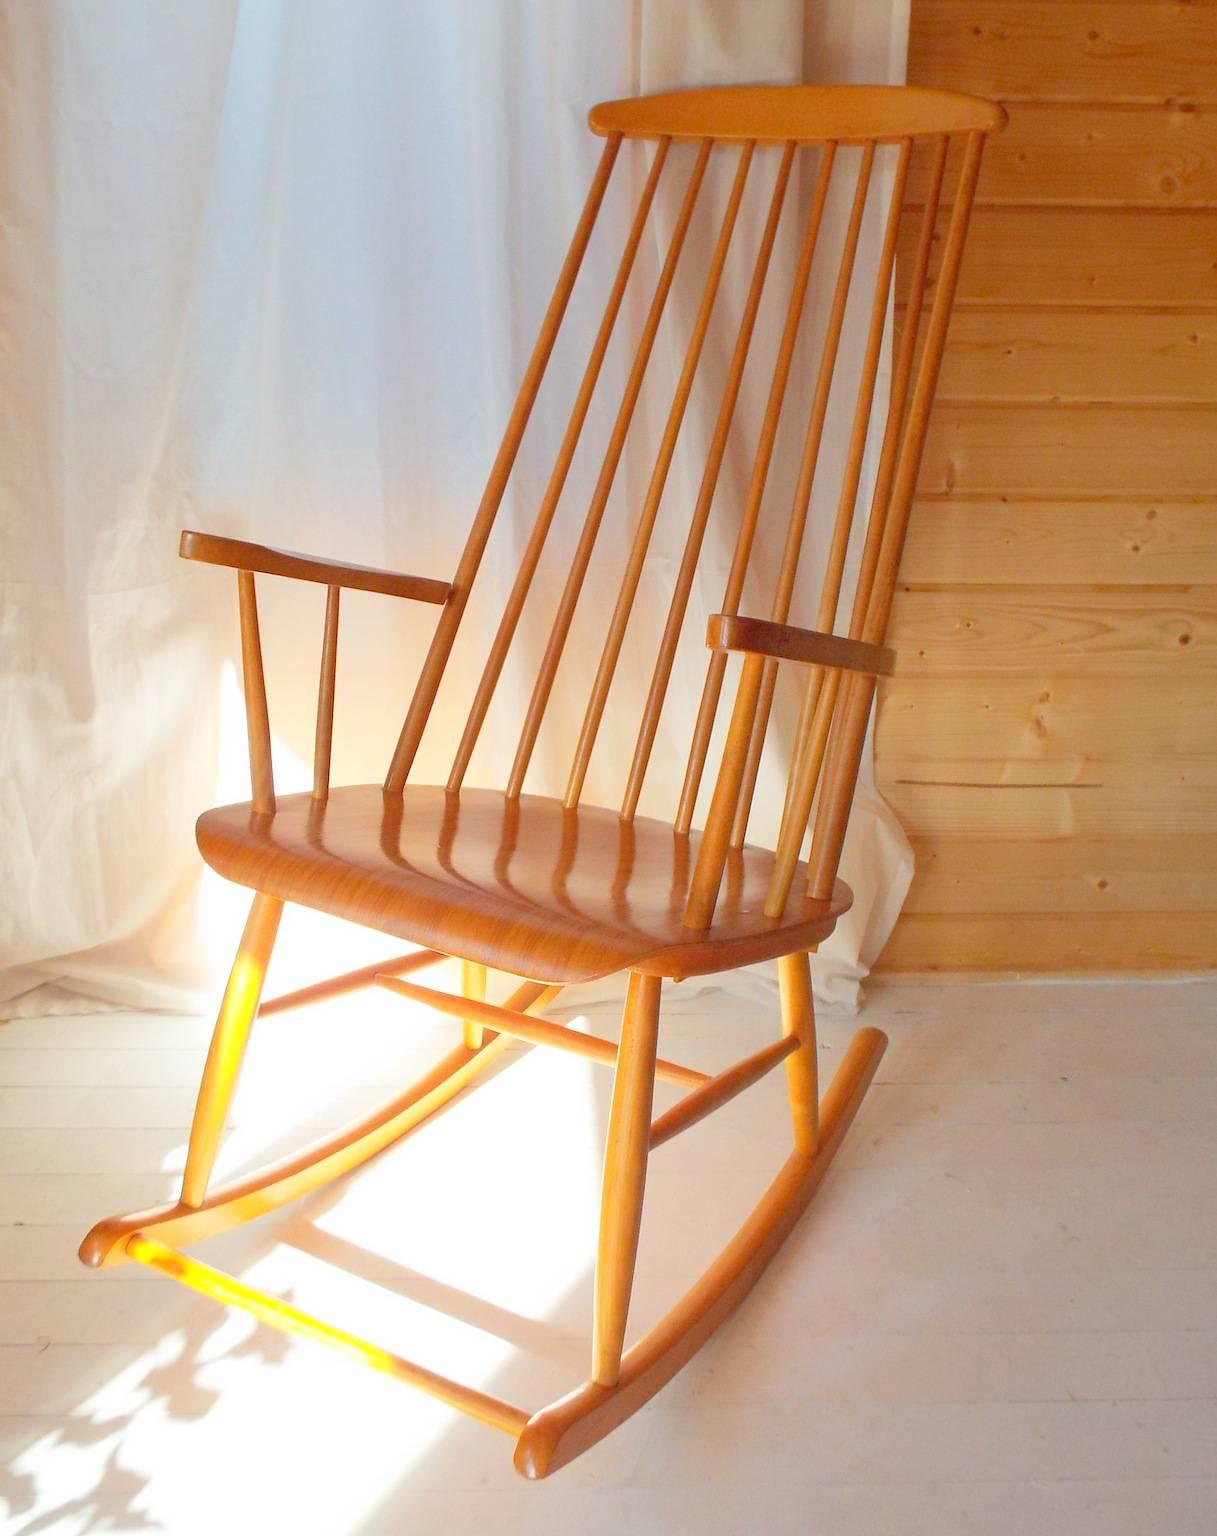 HC Studio are delighted to offer this rocking chair, designed by Finnish designer Ilmari Tapiovaara. Working in collaboration with Artek, limited number runs were produced throughout the 1960s.

Initially similar in appearance to the